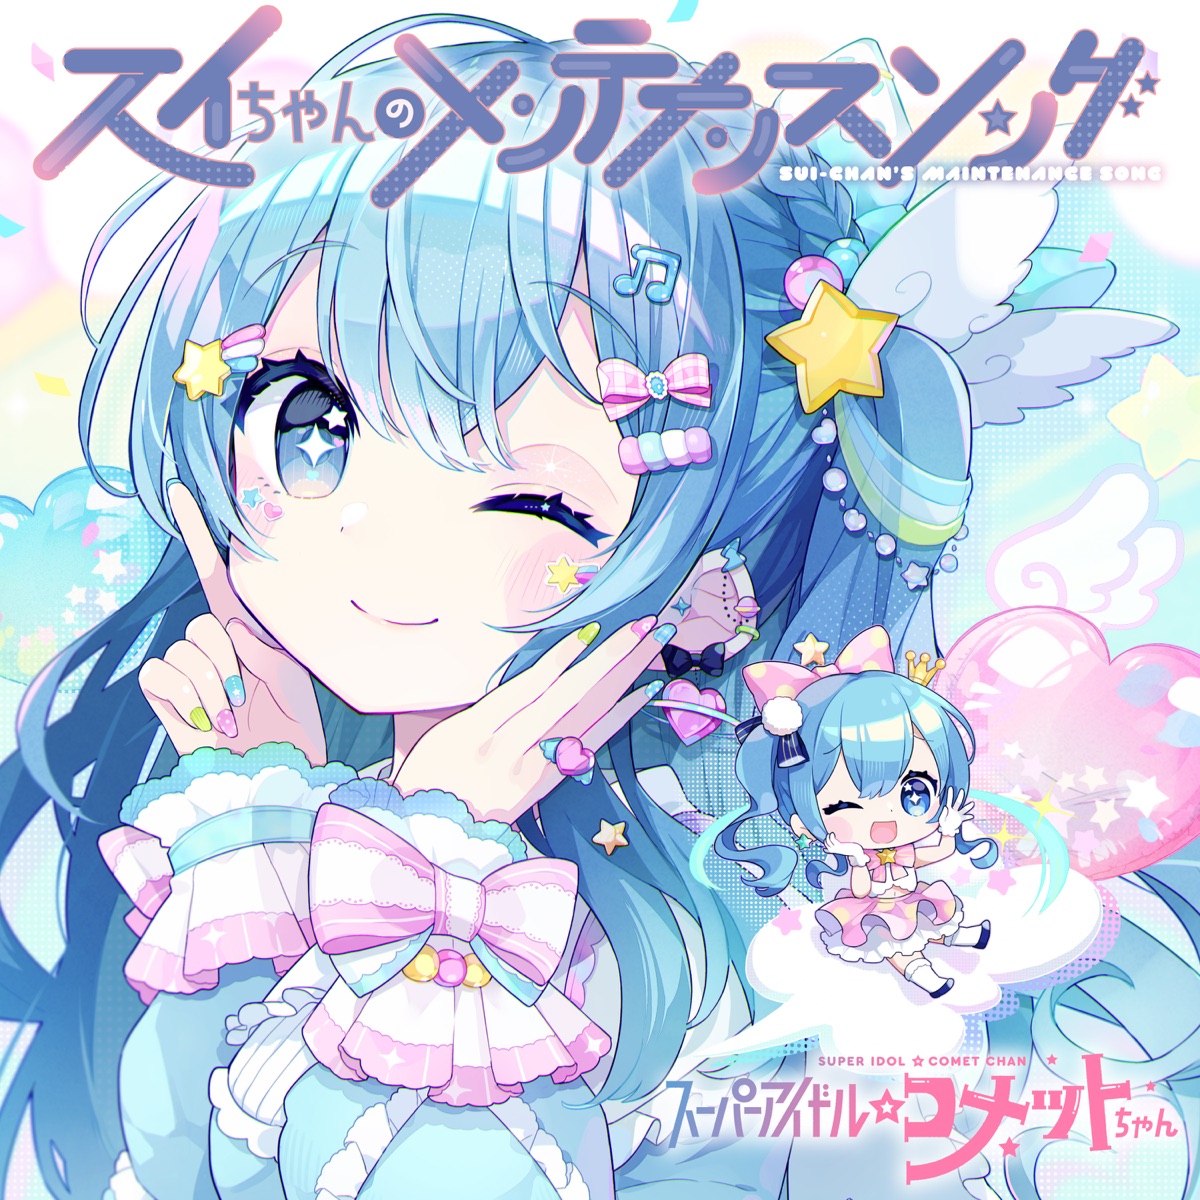 Cover art for『Hoshimachi Suisei - スイちゃんのメンテナンスソング』from the release『Sui-chan no Maintenance Song